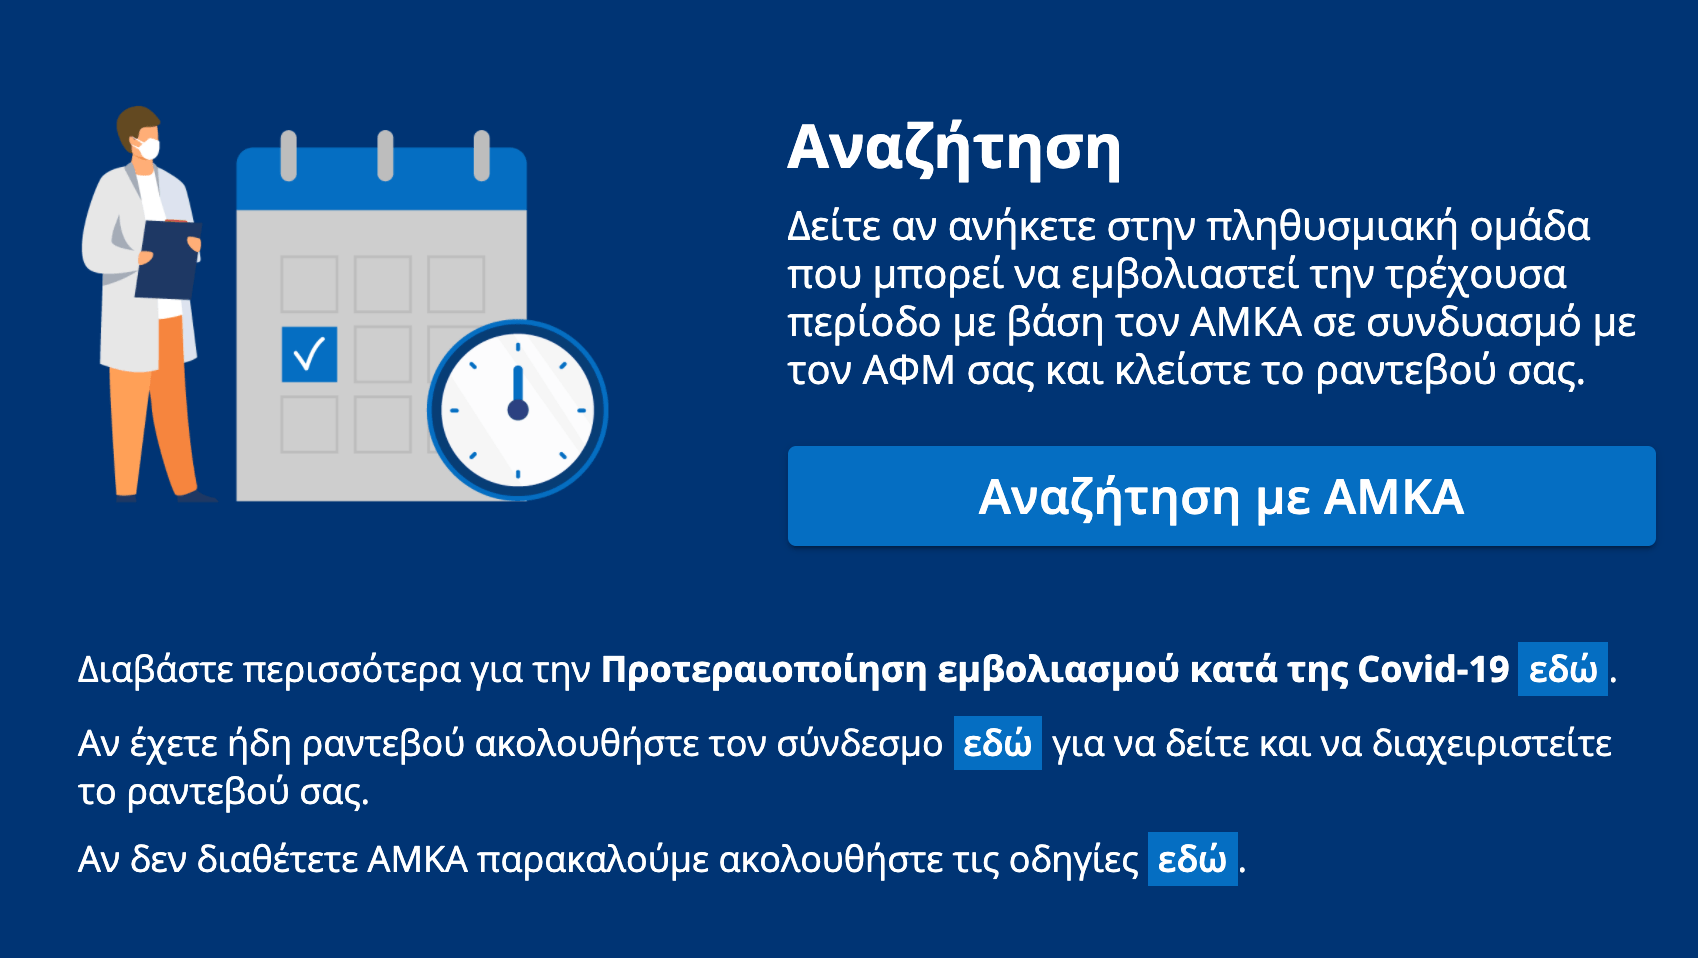 AMKA social security number for Greece